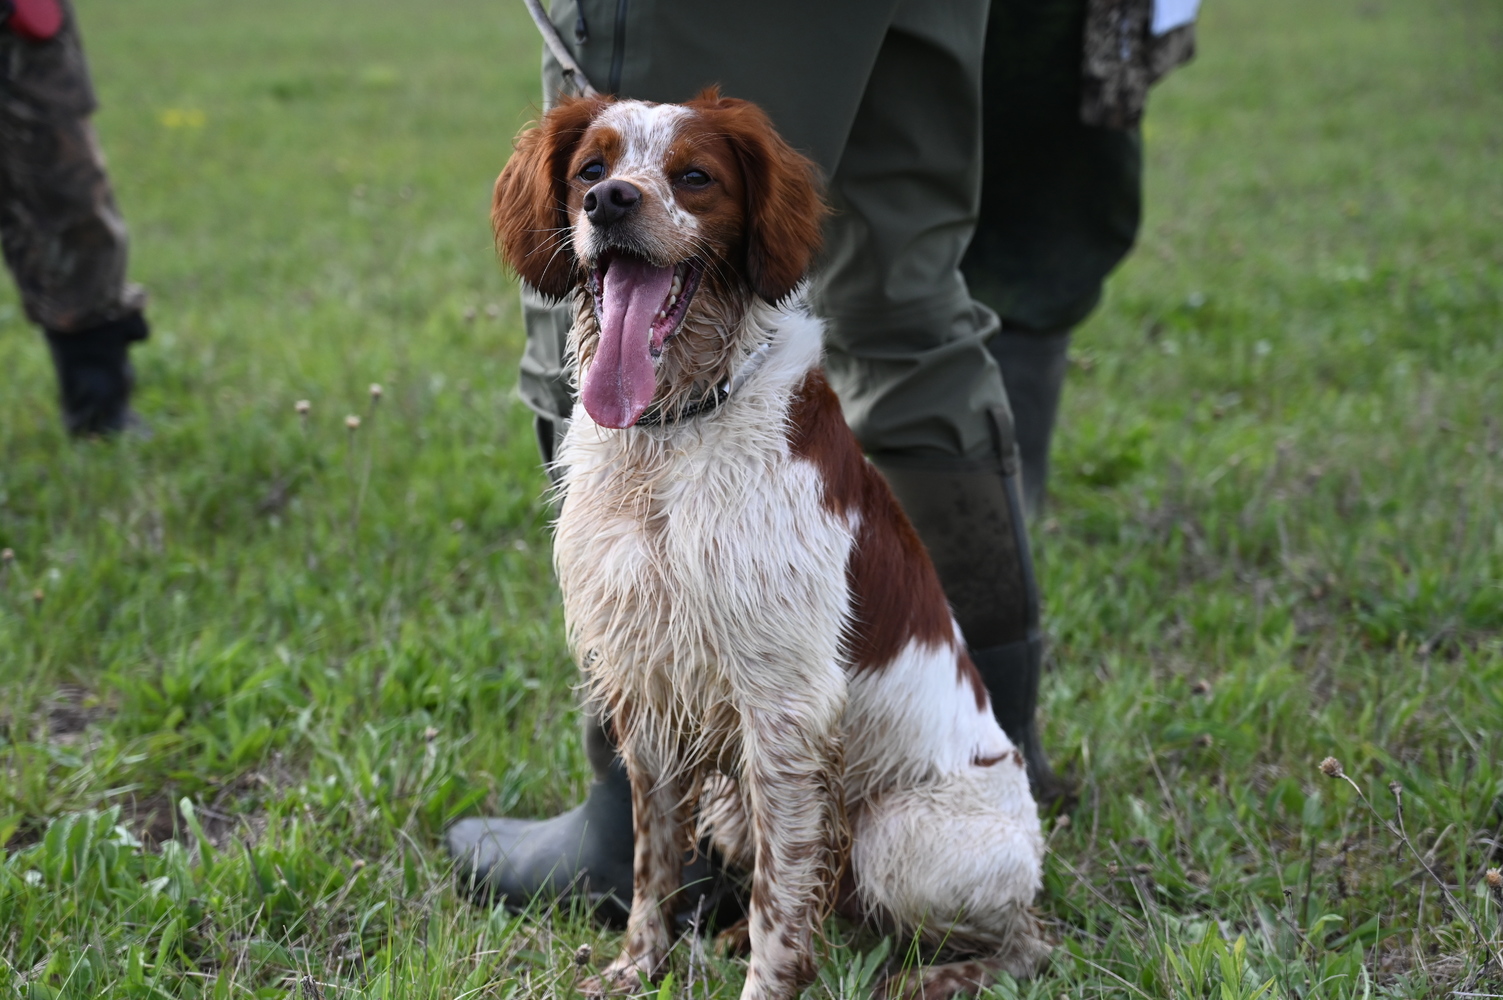 Competitions of hunting dogs were held in Kostroma